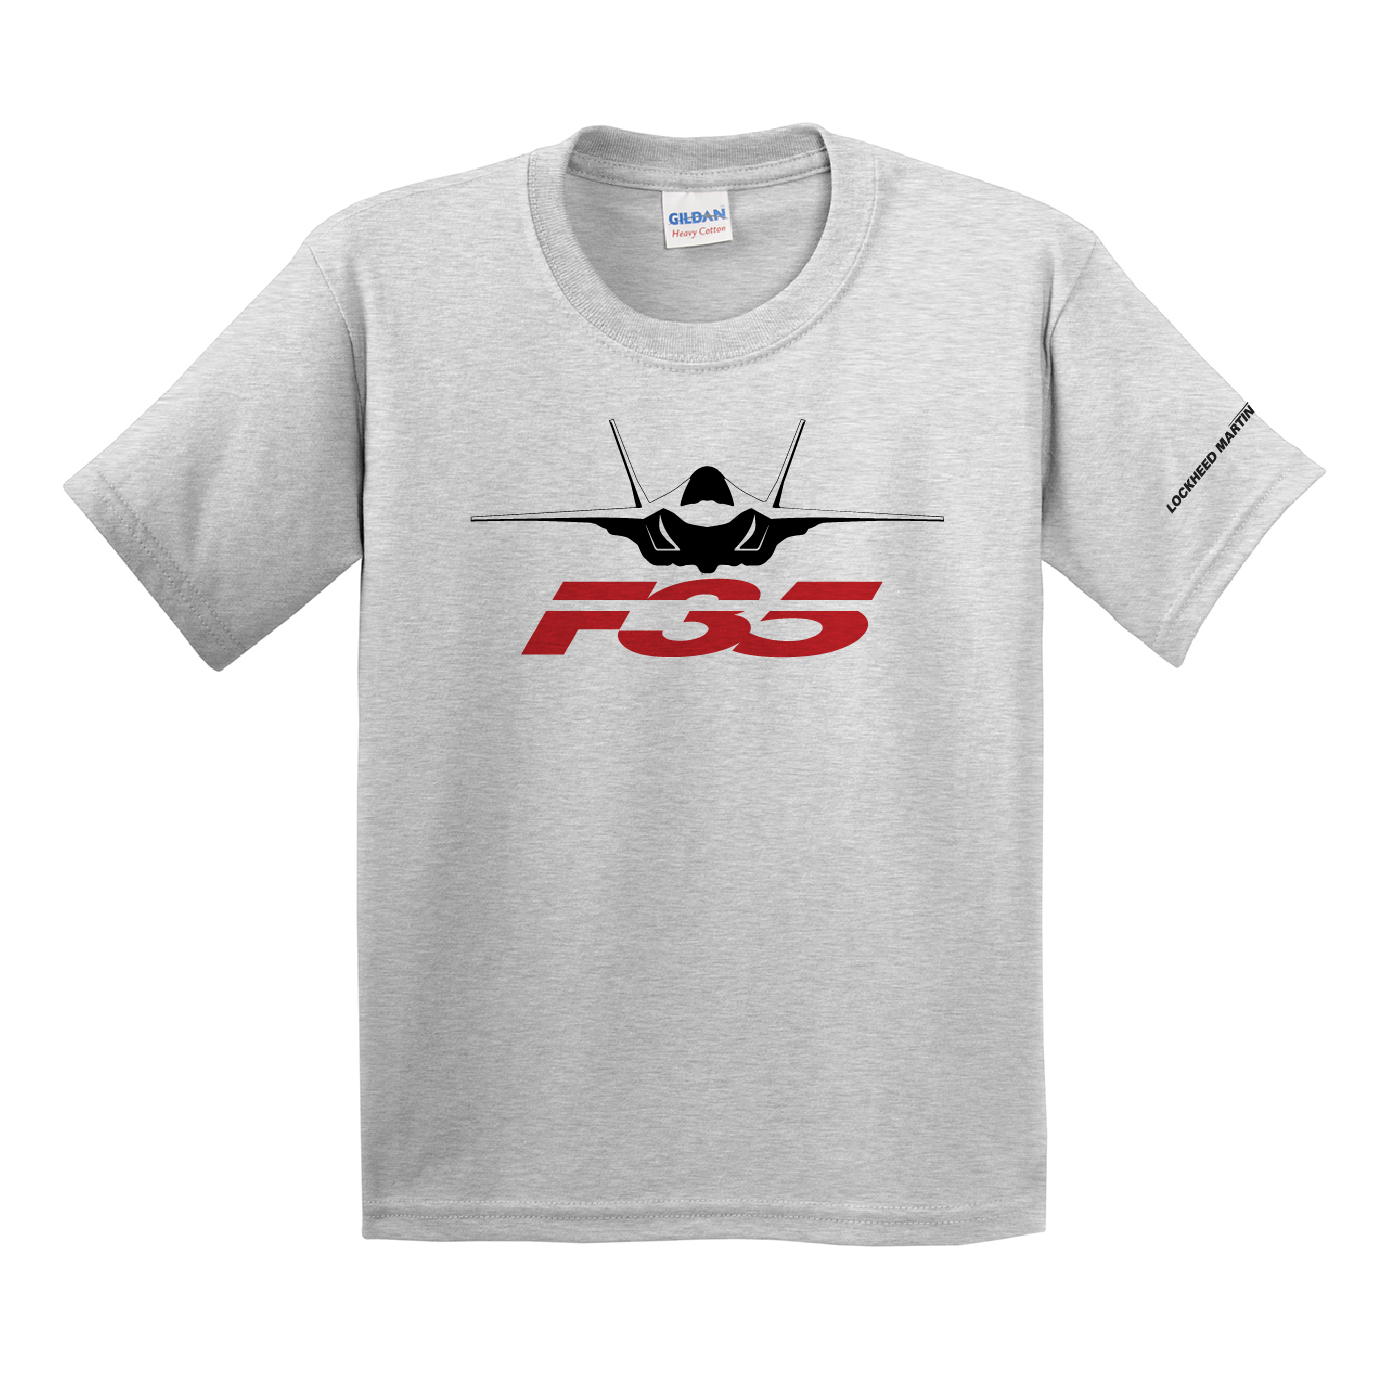 F-35 Youth 100% Cotton Tee